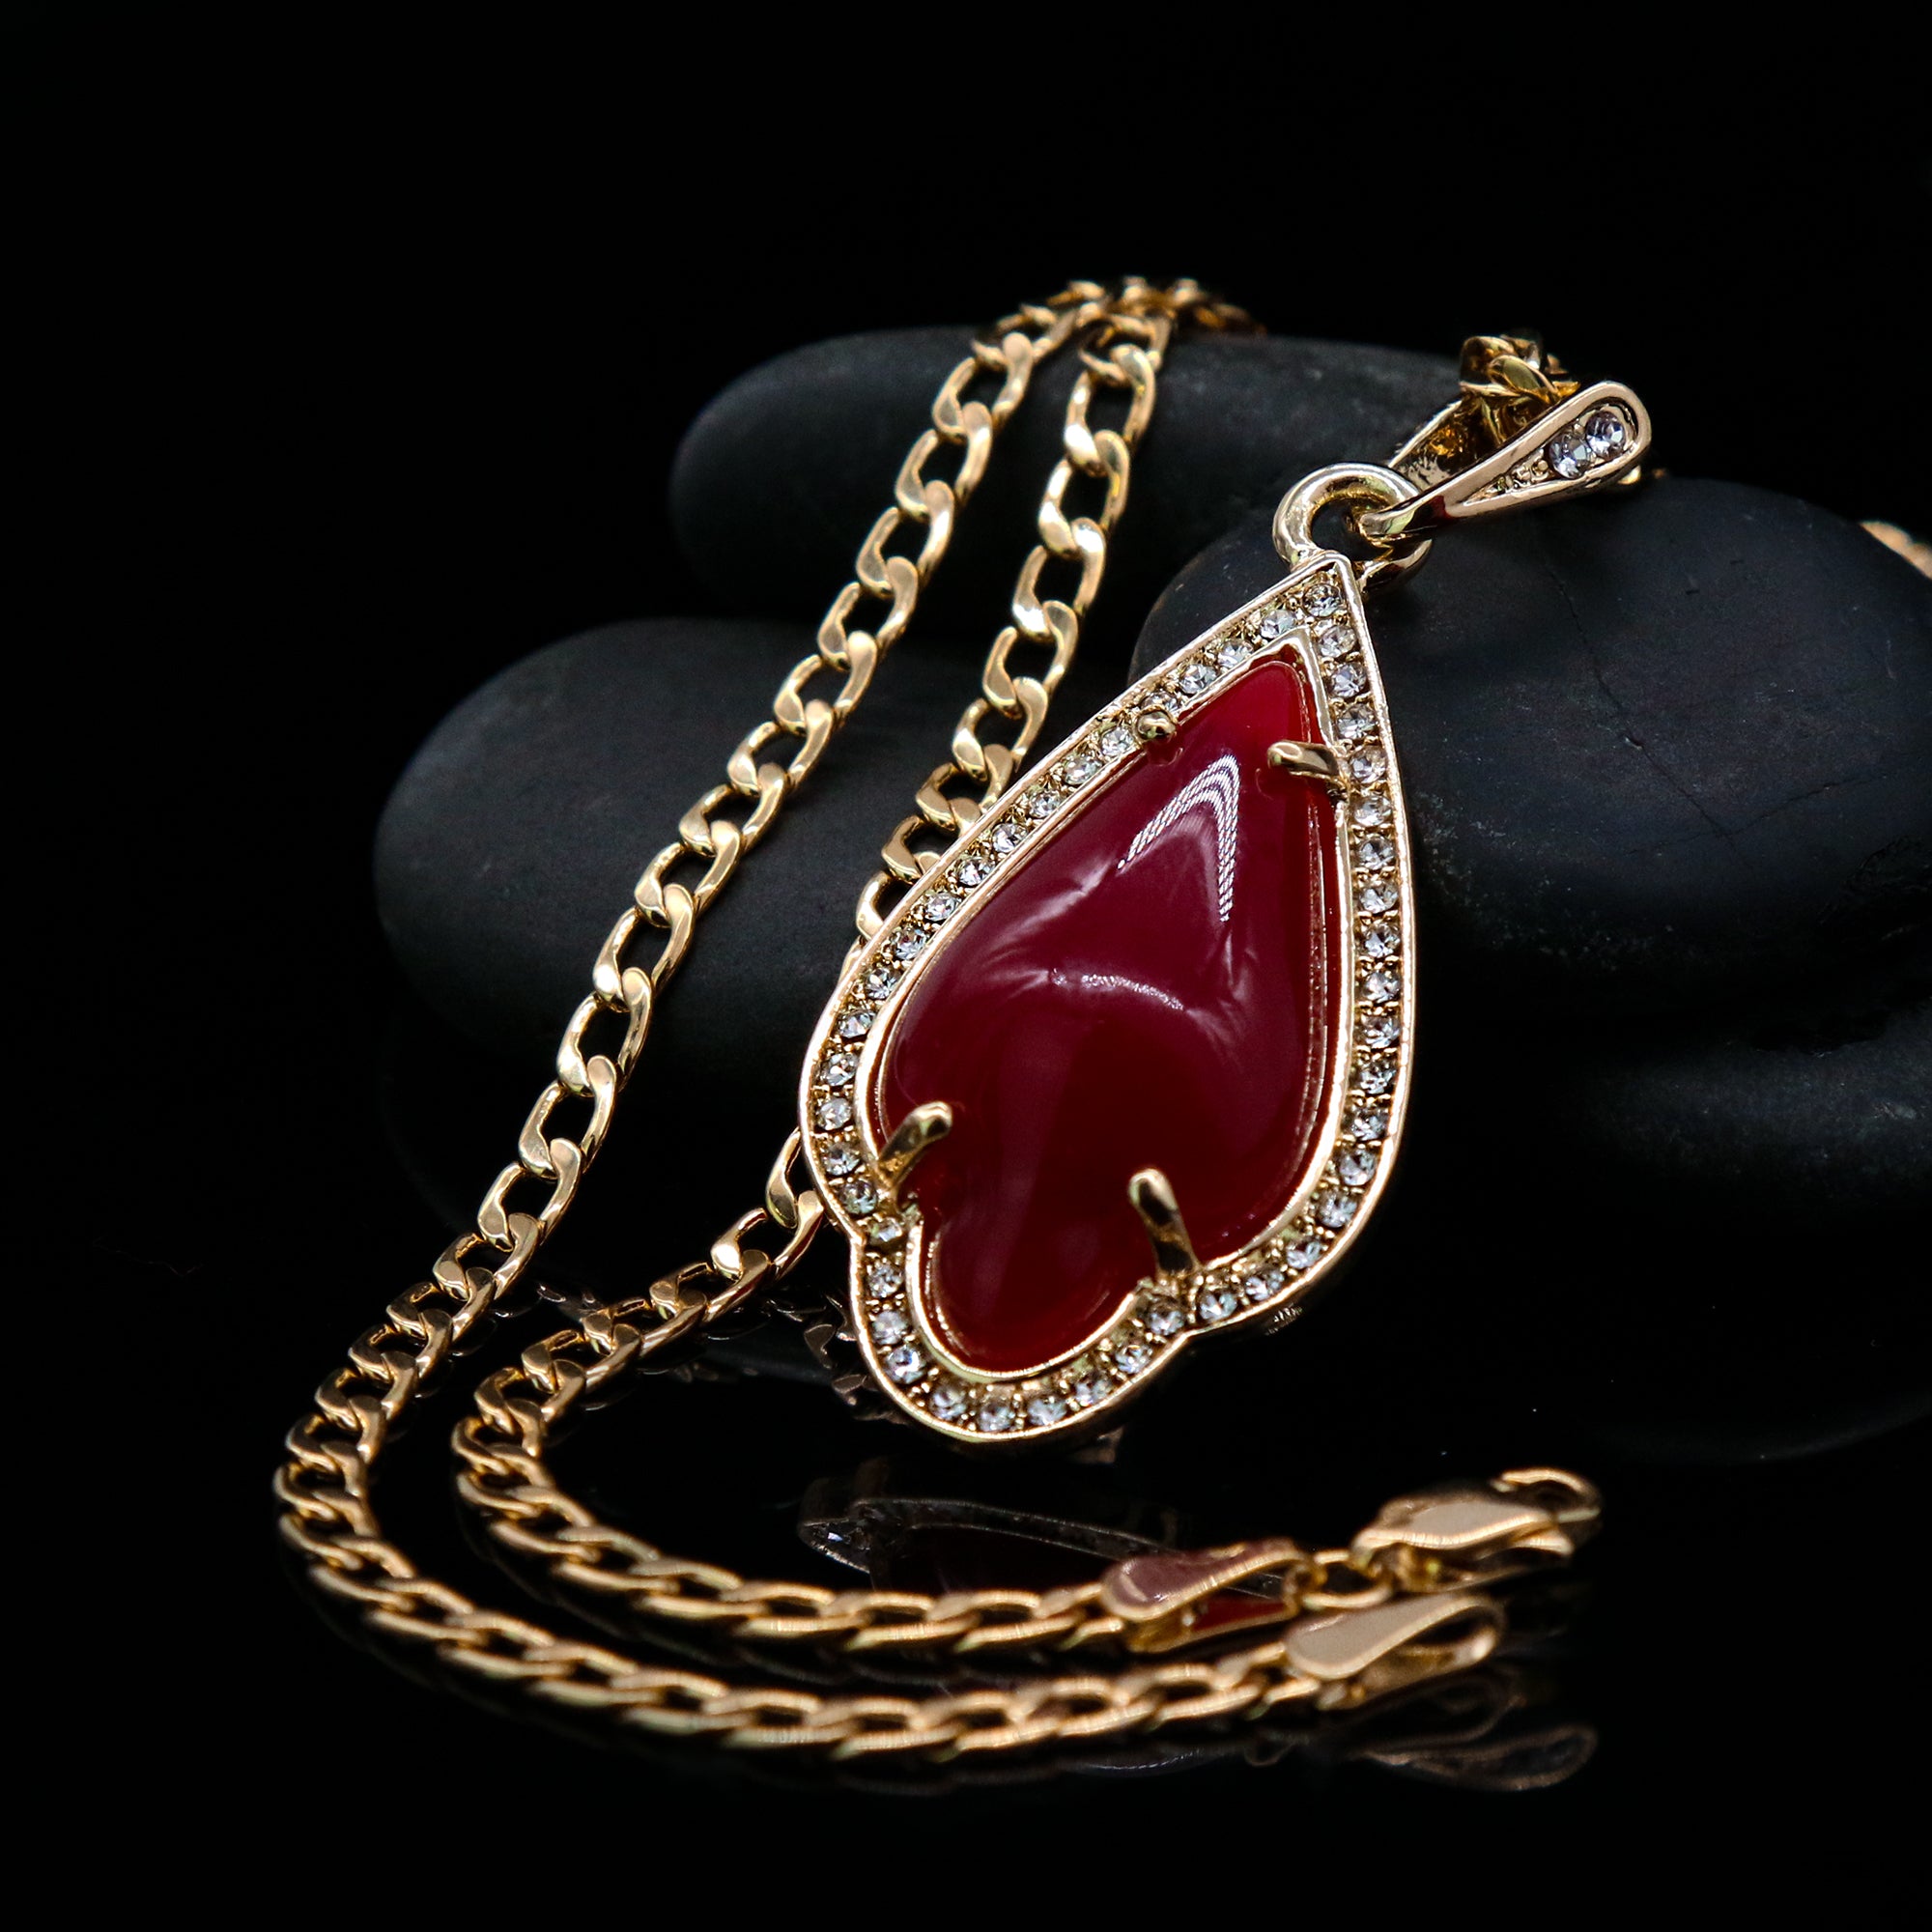 Red Curved Tear Women's Jade Chain Pendant Necklace